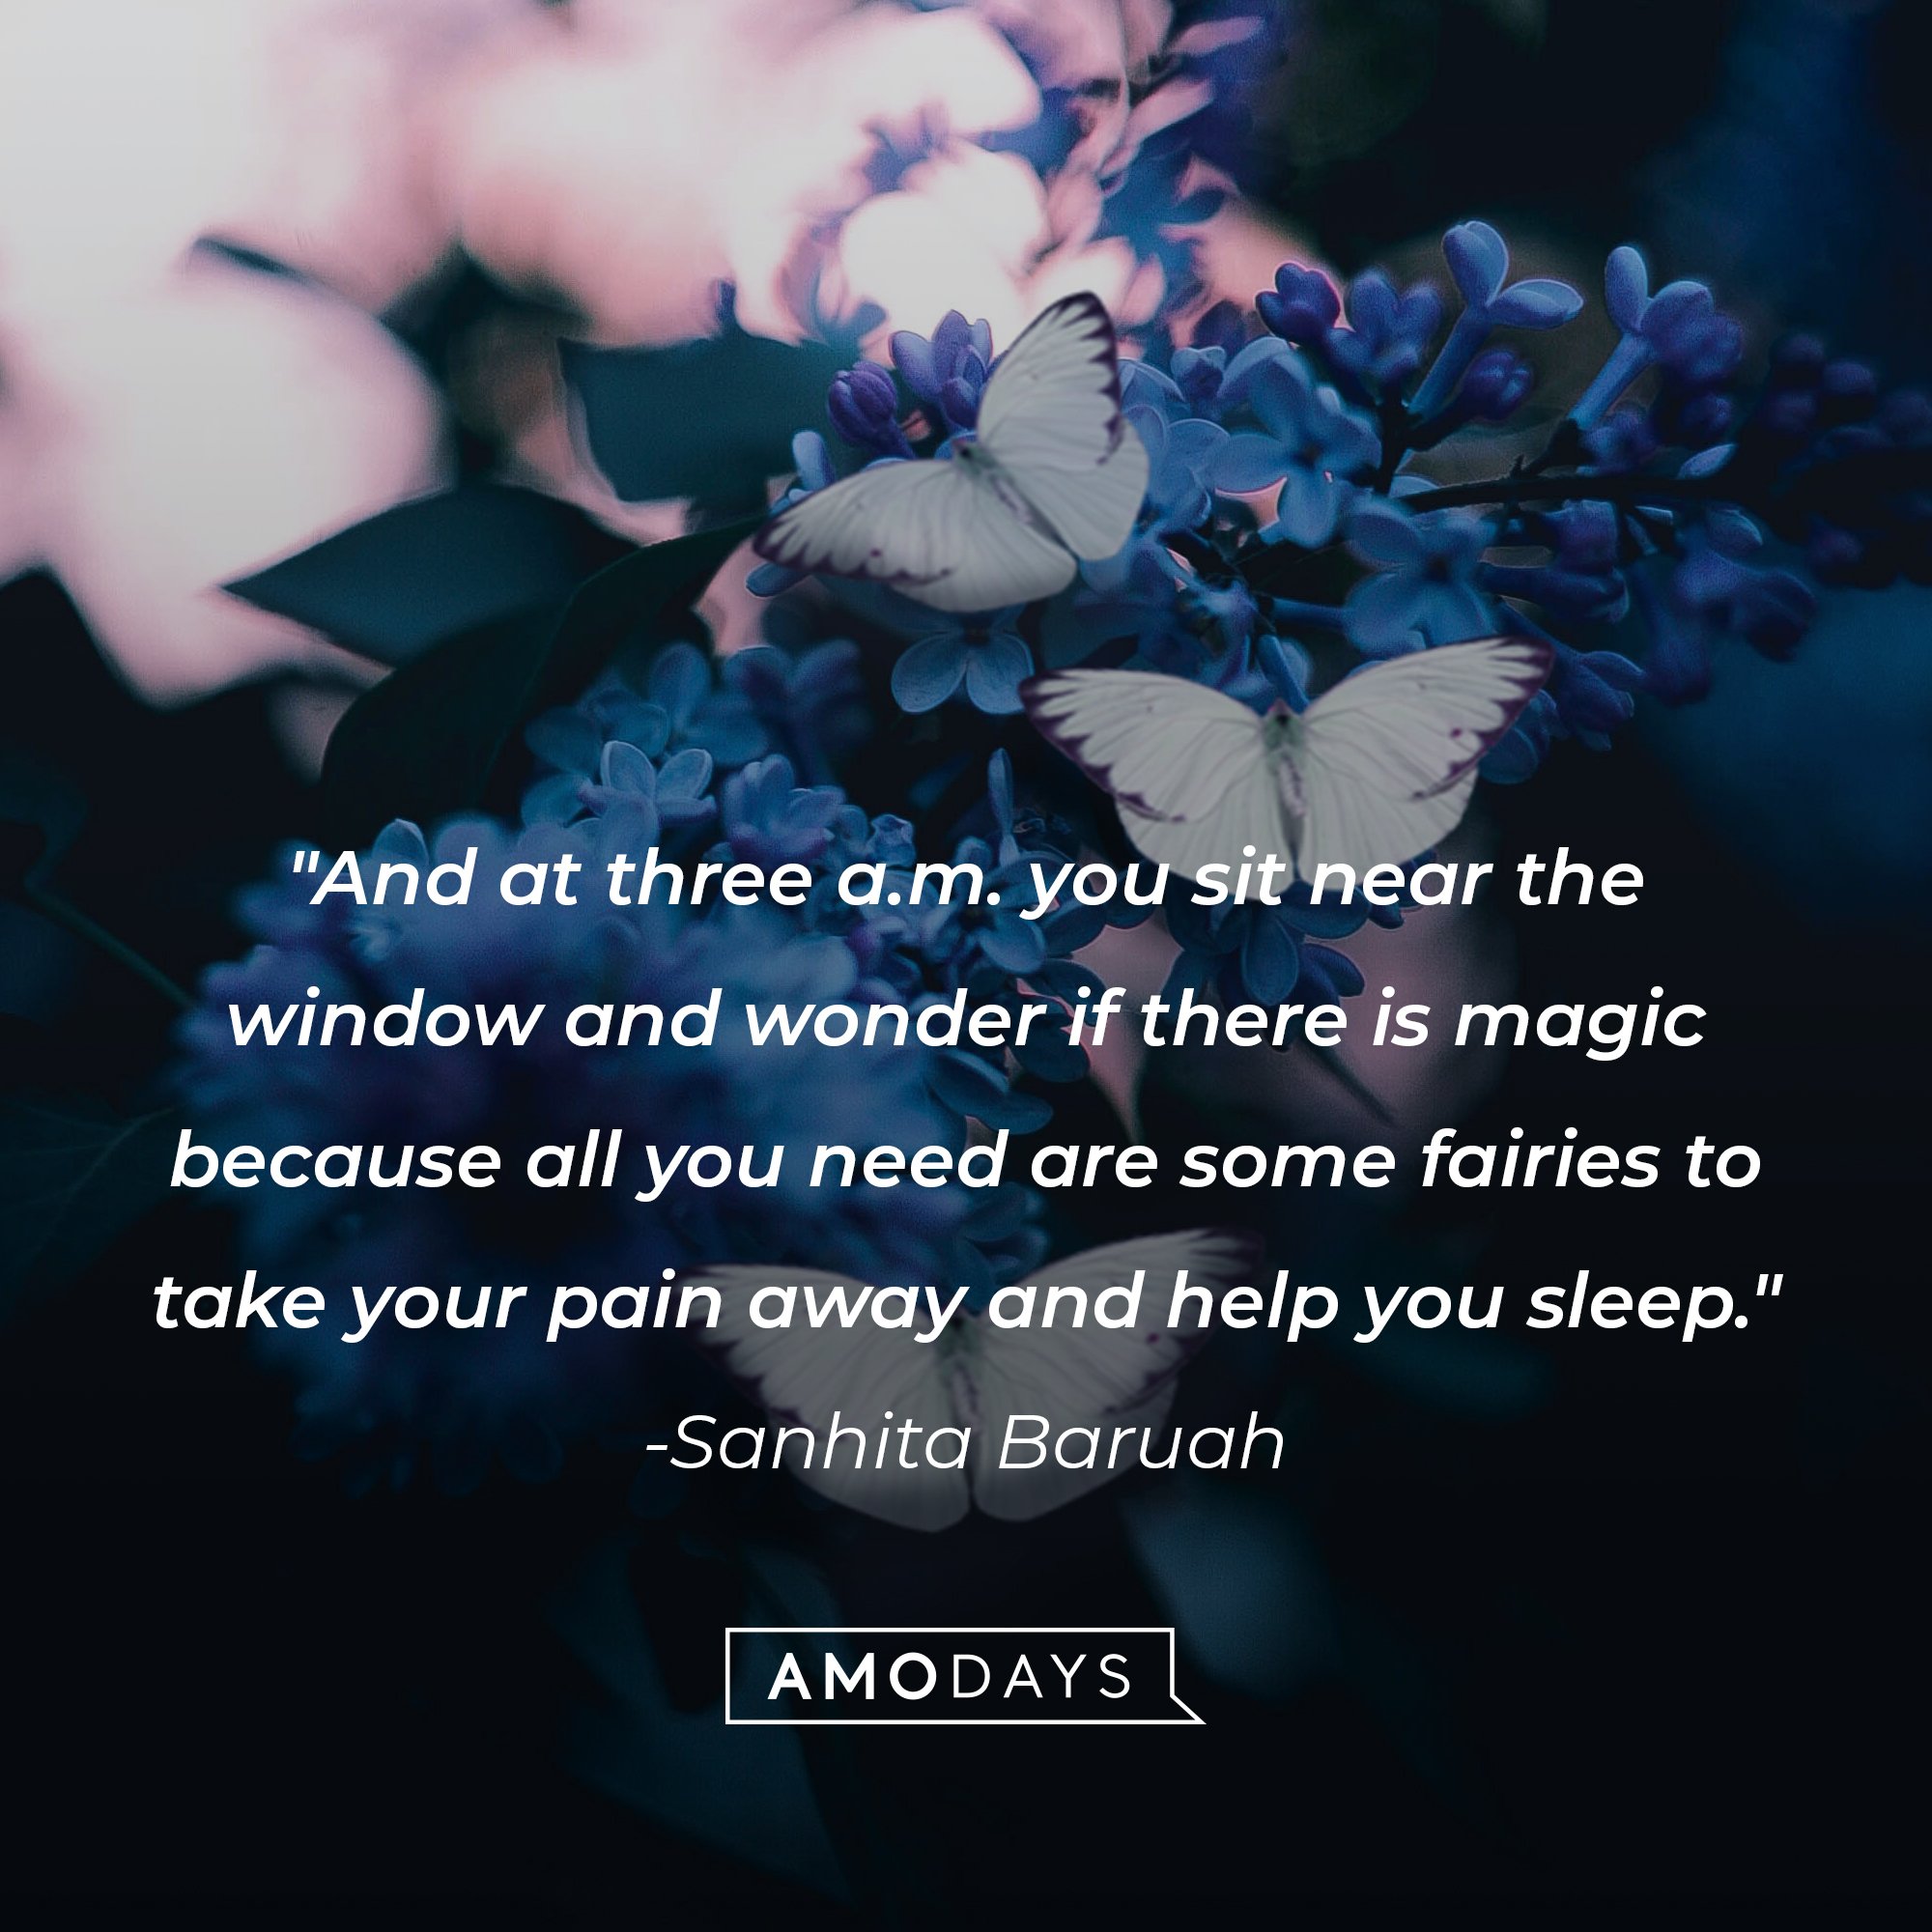 Sanhita Baruah's quote: "And at three a.m. you sit near the window and wonder if there is magic because all you need are some fairies to take your pain away and help you sleep." | Image: Amo Days